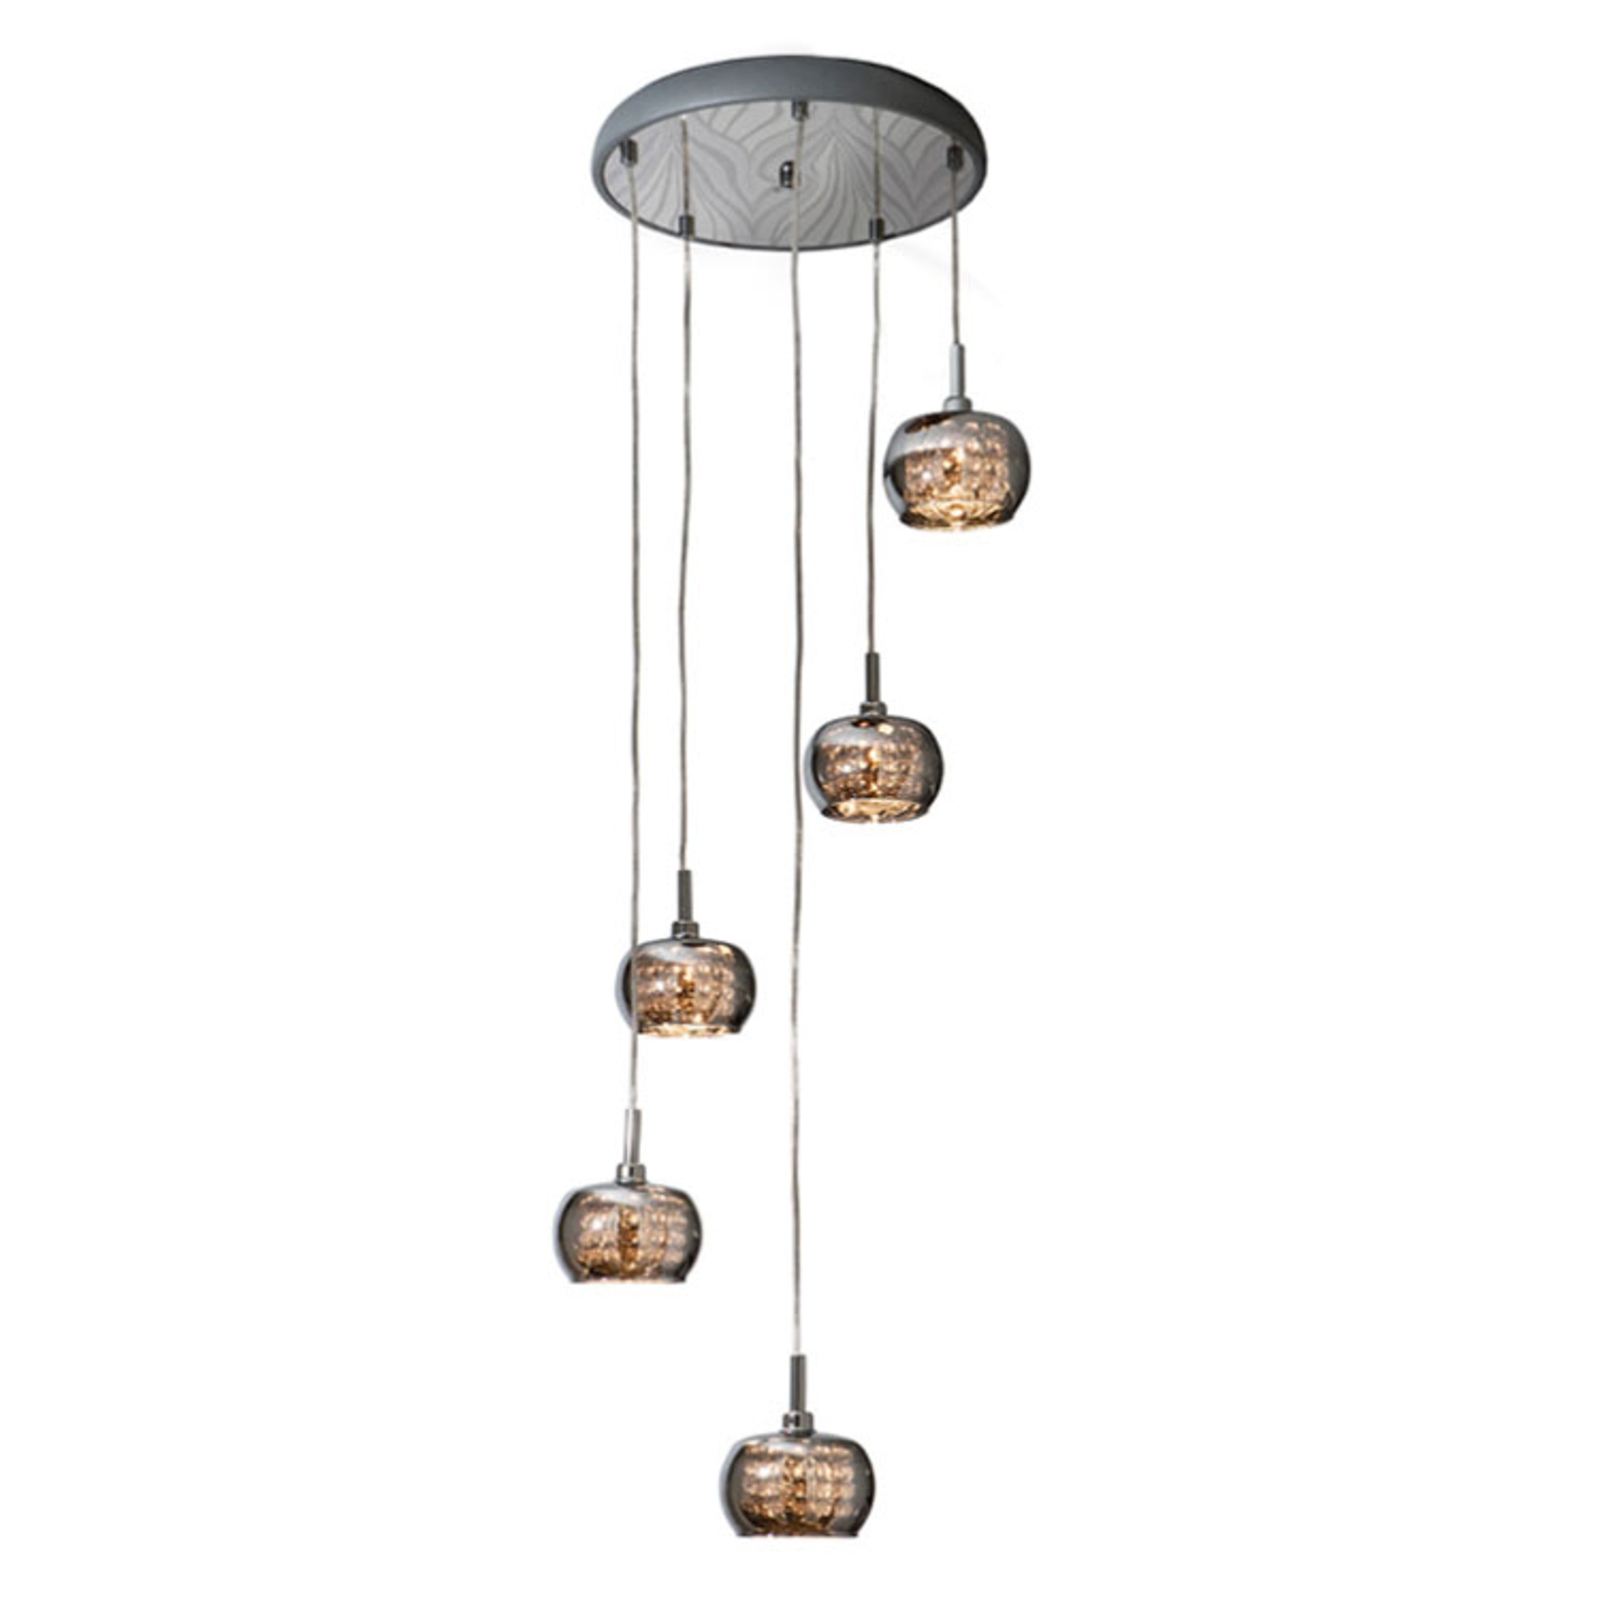 Arian LED hanging light with crystals, 5-bulb